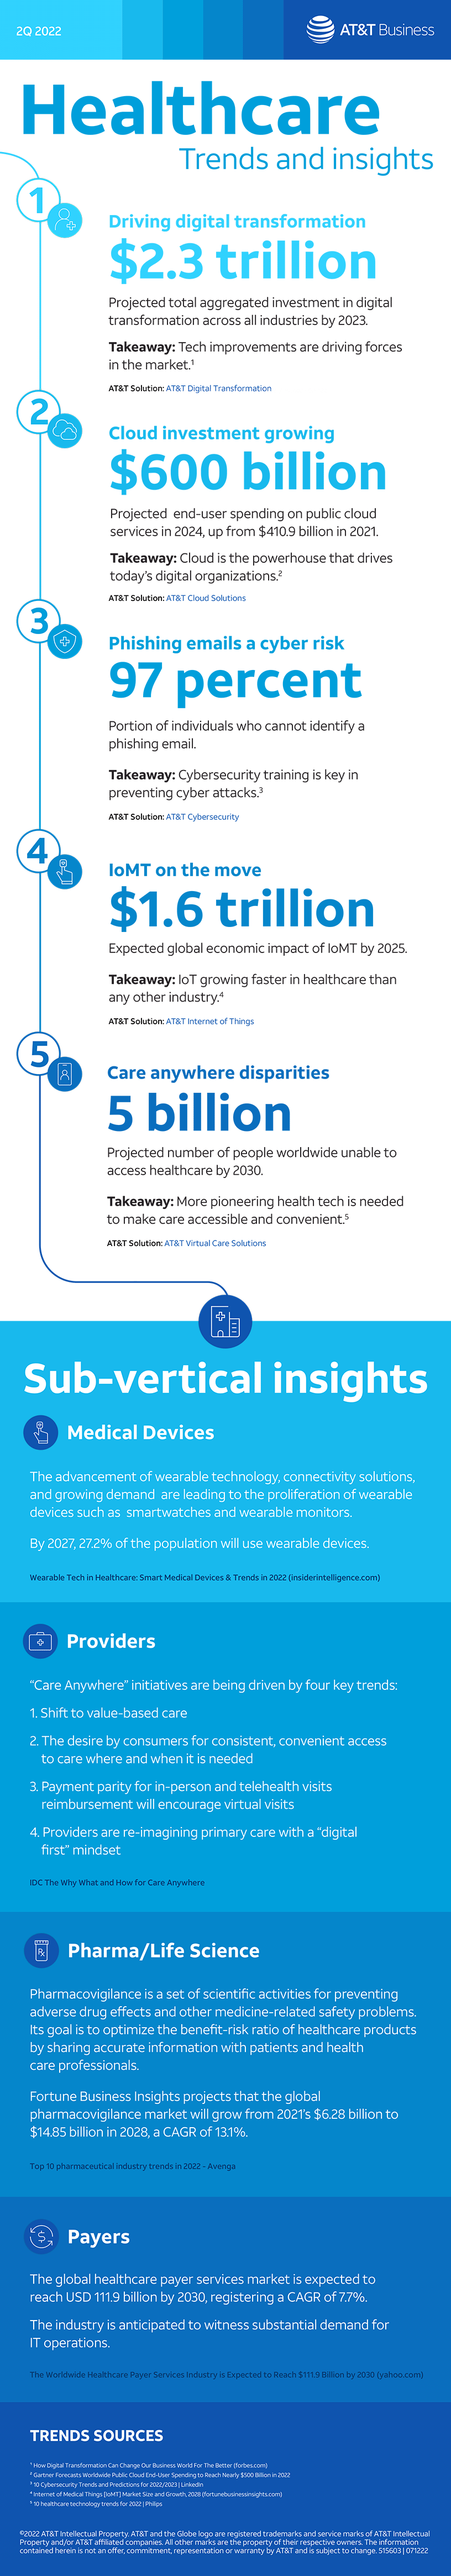 Updated healthcare industry trends infographic